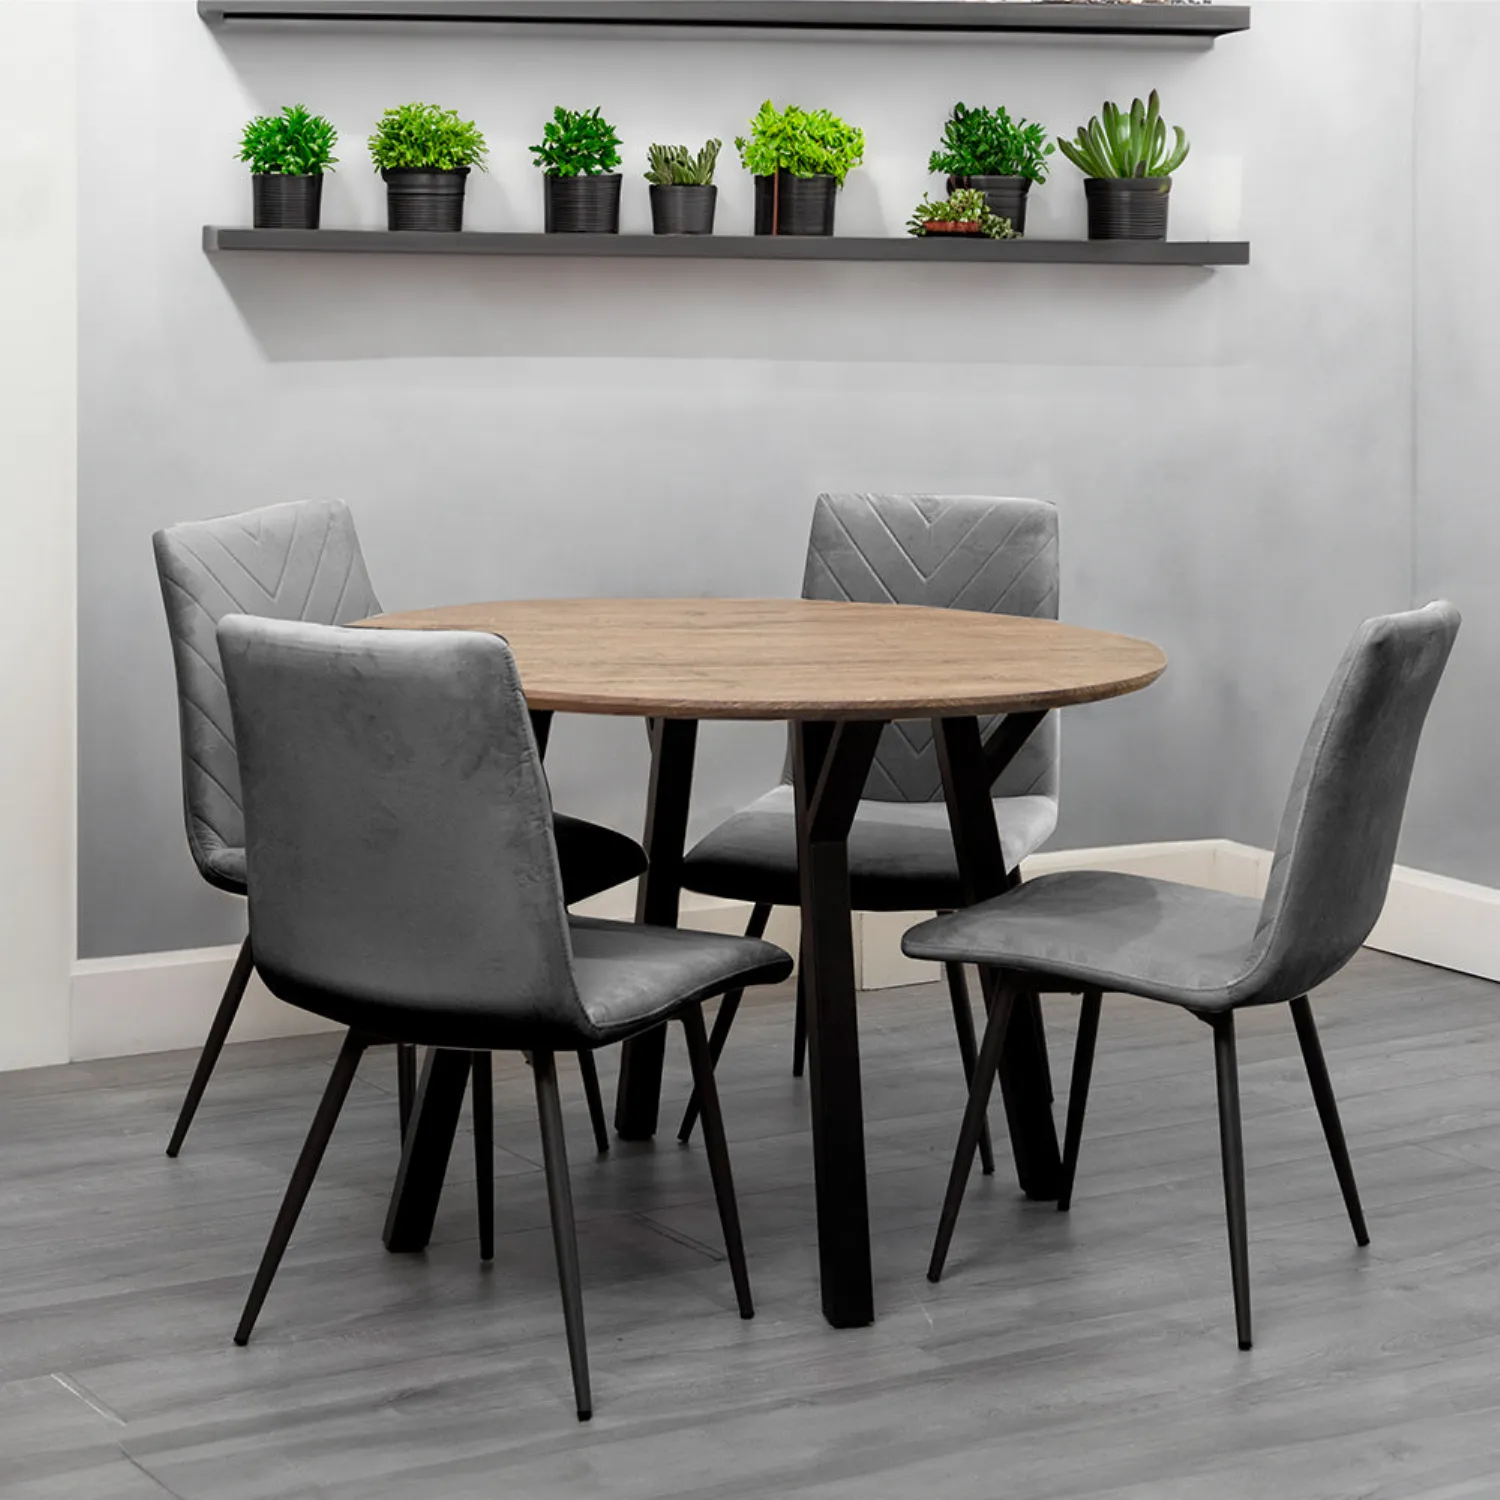 Dining Set 1.1m Oak Finish Round Table And 4 x Grey Chairs